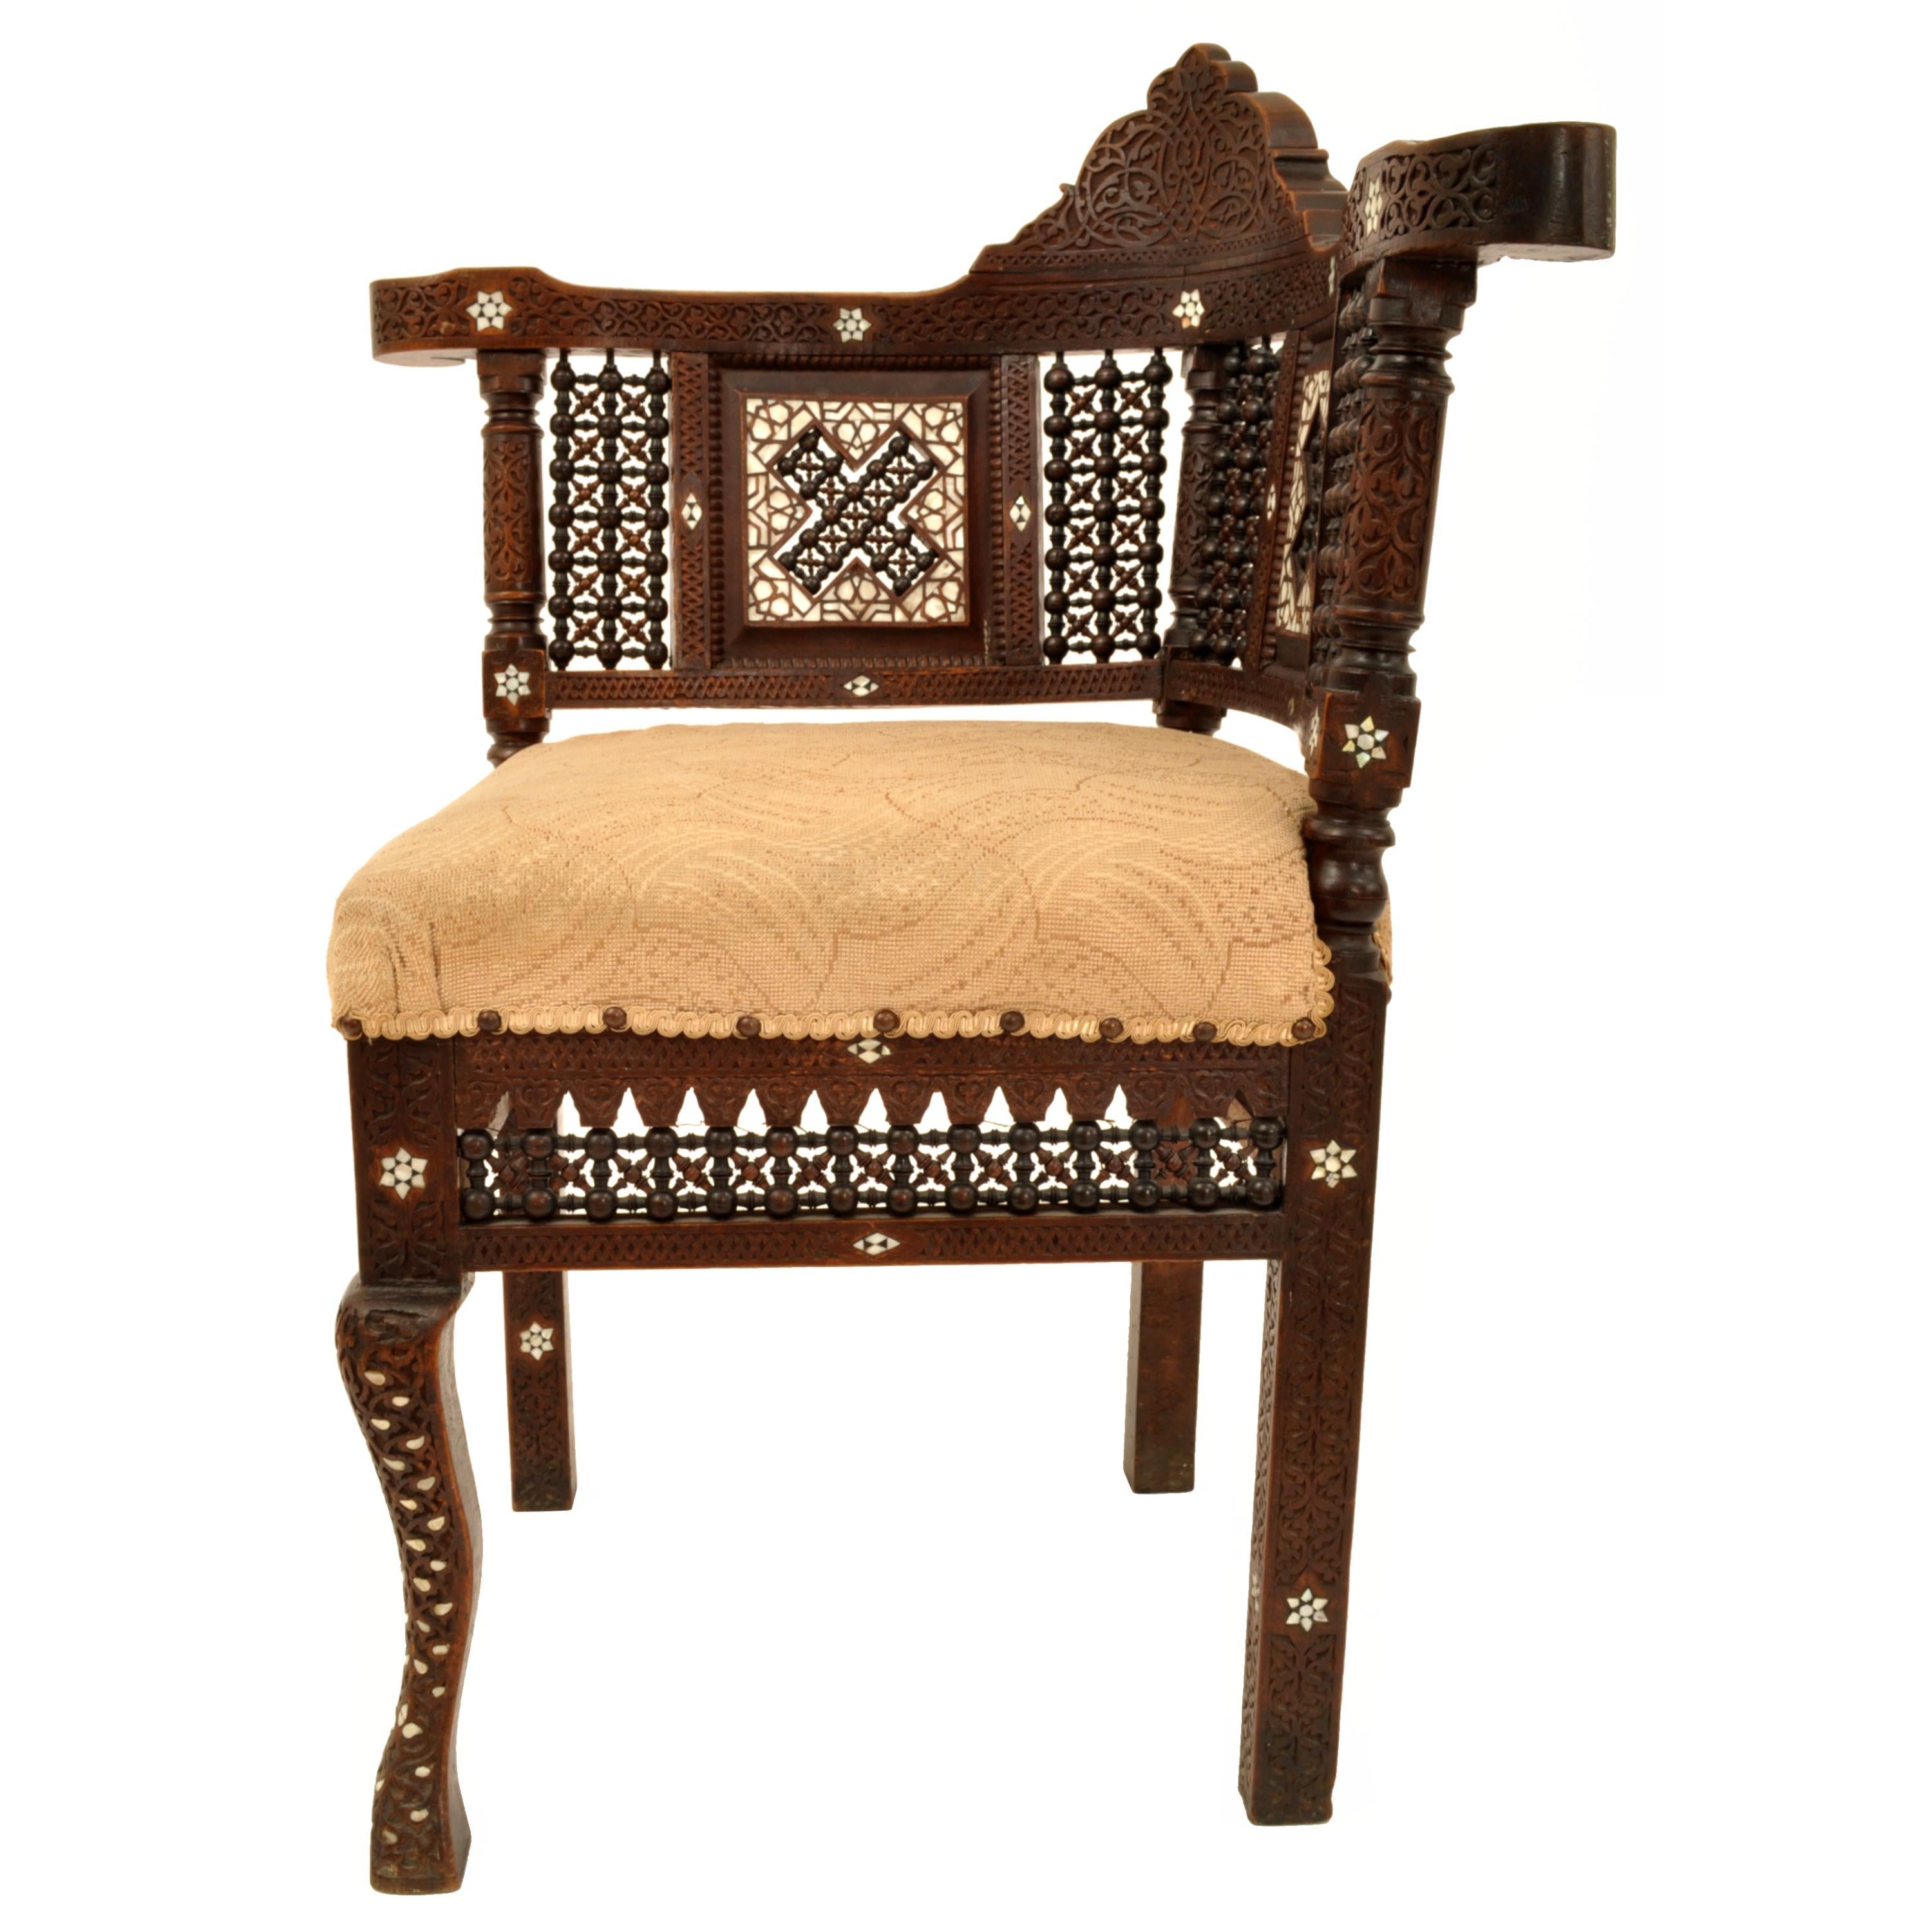 Antique Islamic Moorish Syrian Carved Inlaid Mother of Pearl Corner Chair 1880 In Good Condition For Sale In Portland, OR